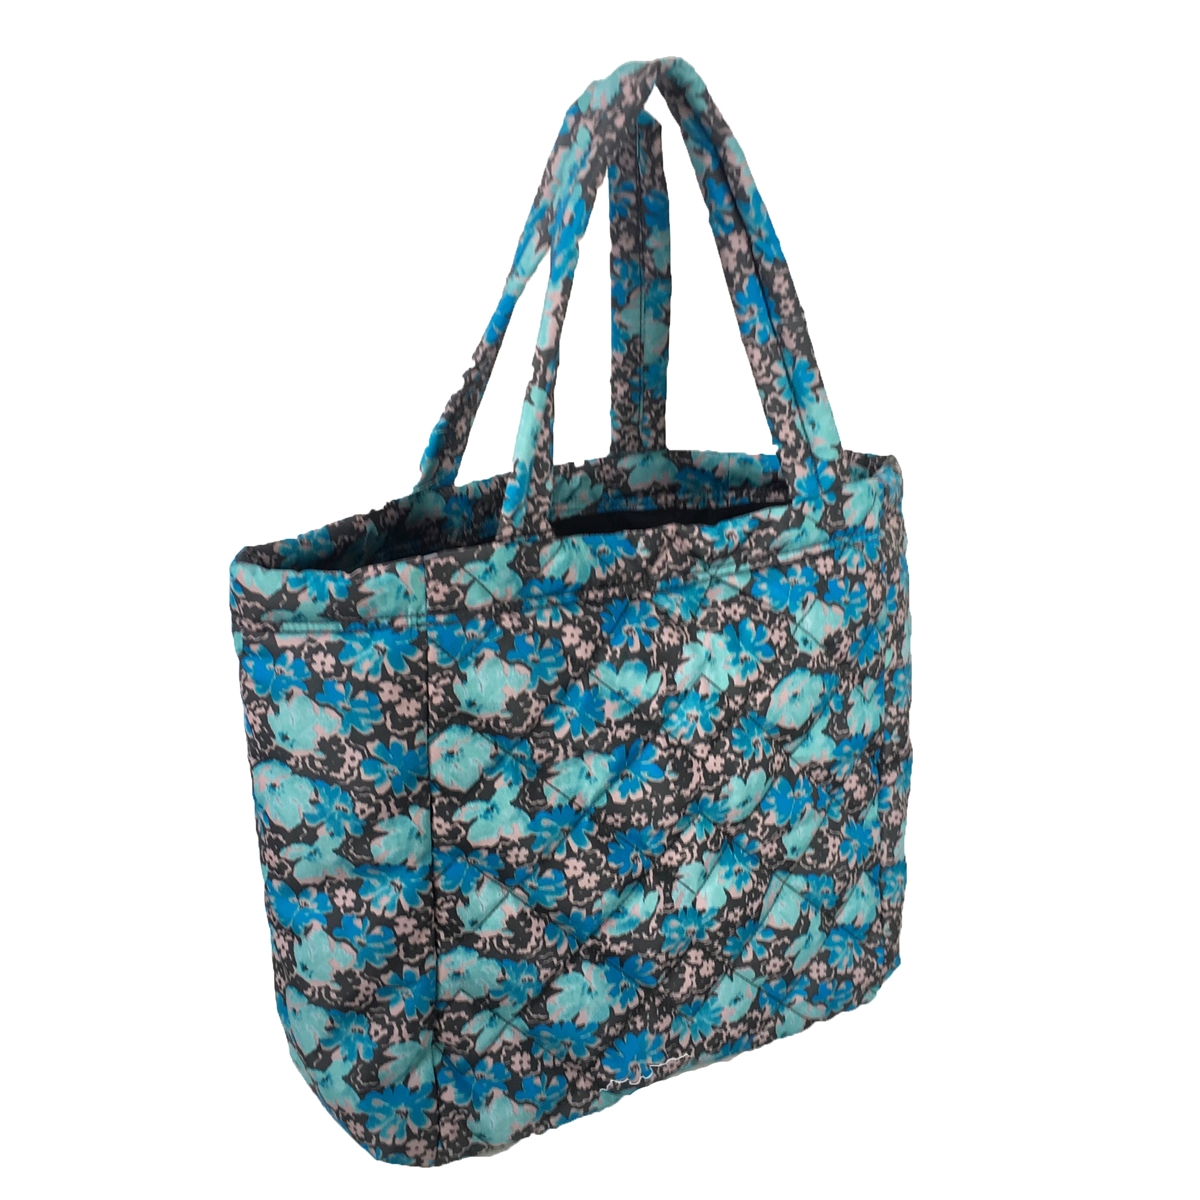 The Flower Tote – Comme Si